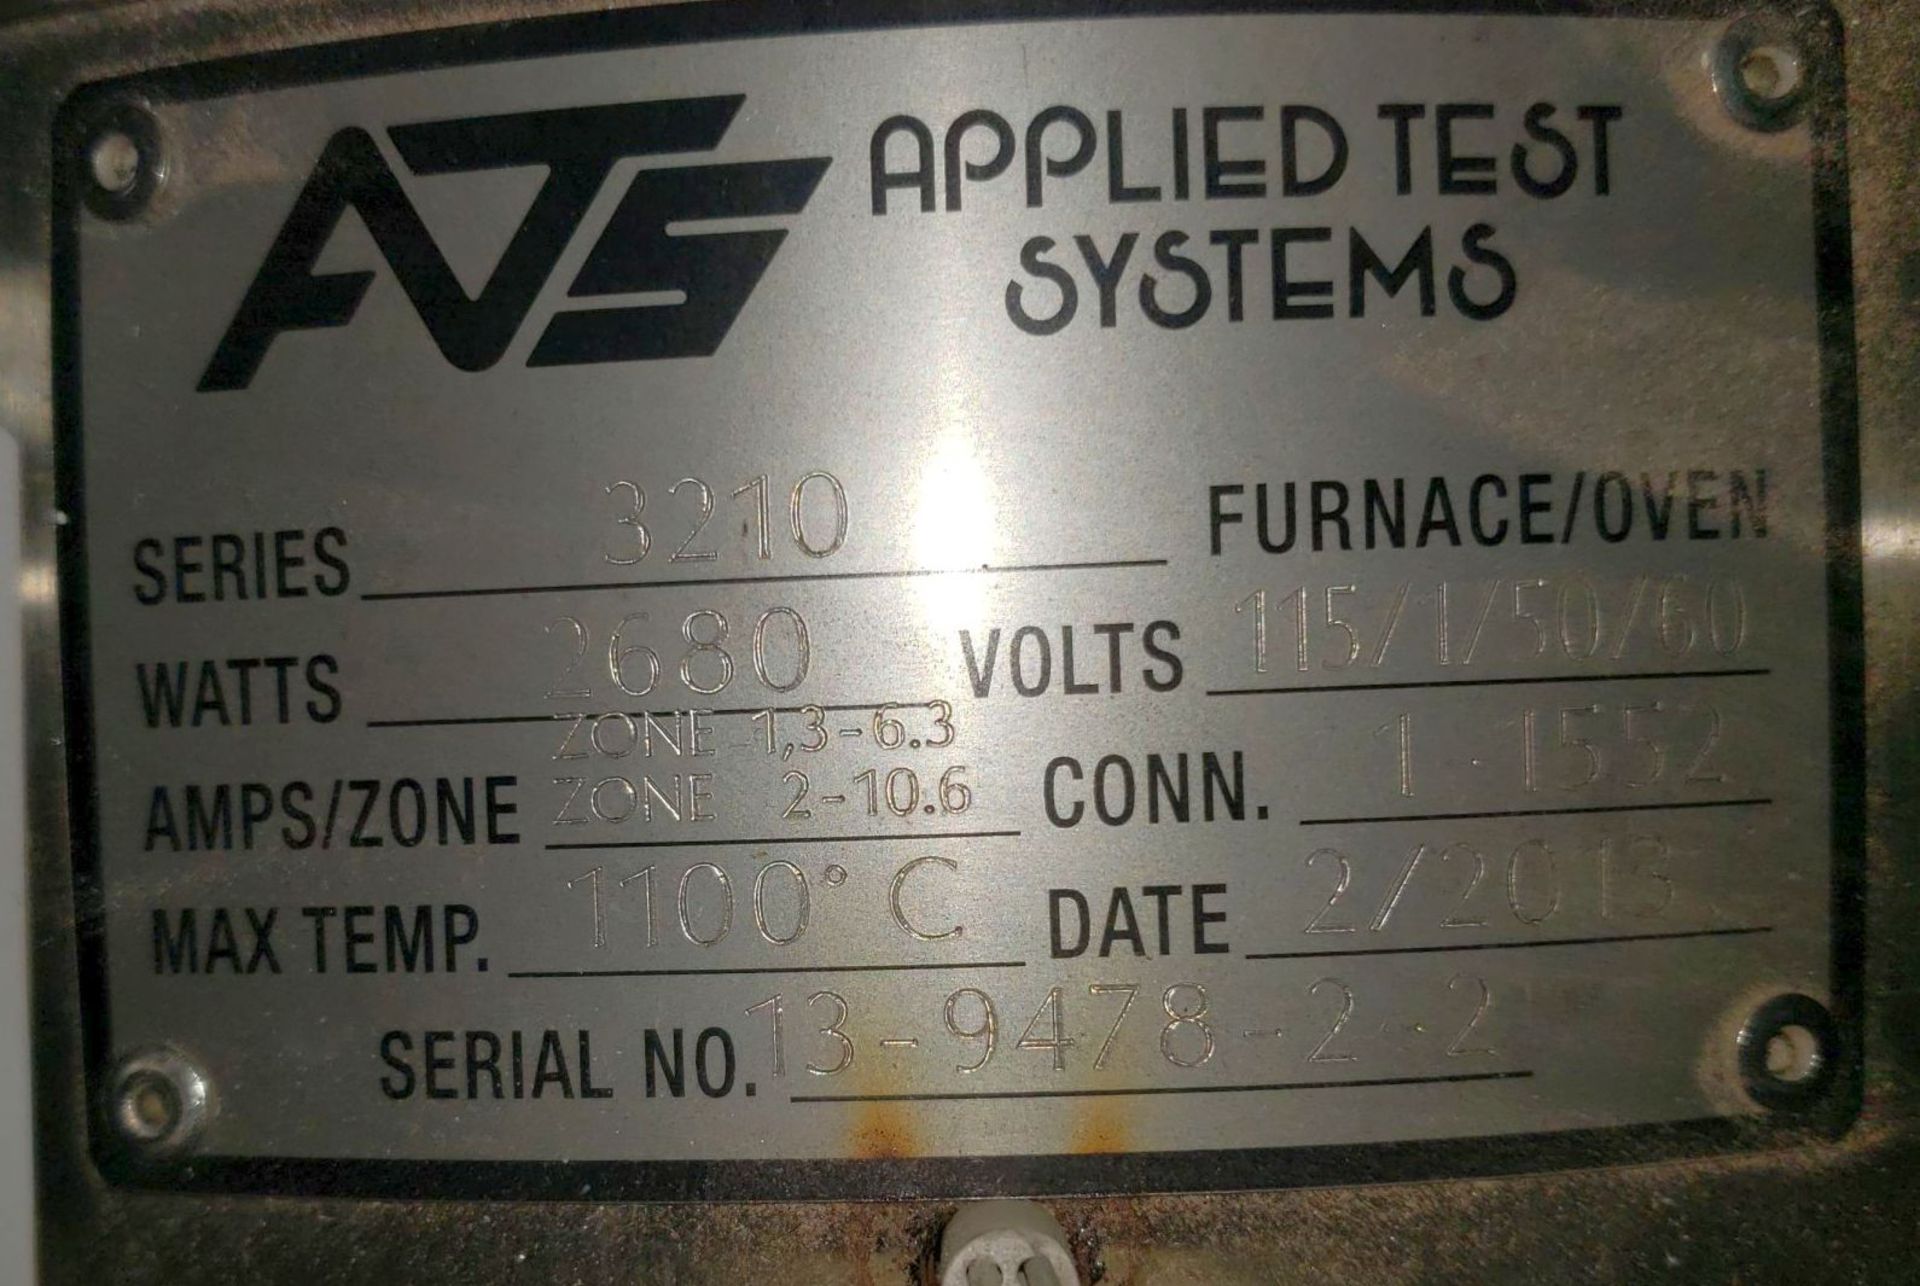 Used Applied Test Systems 3210 SPLIT TUBE FURNACE 2680 WATTS MAX TEMP 1100ºC, 110V serial# 13-9478- - Image 5 of 7